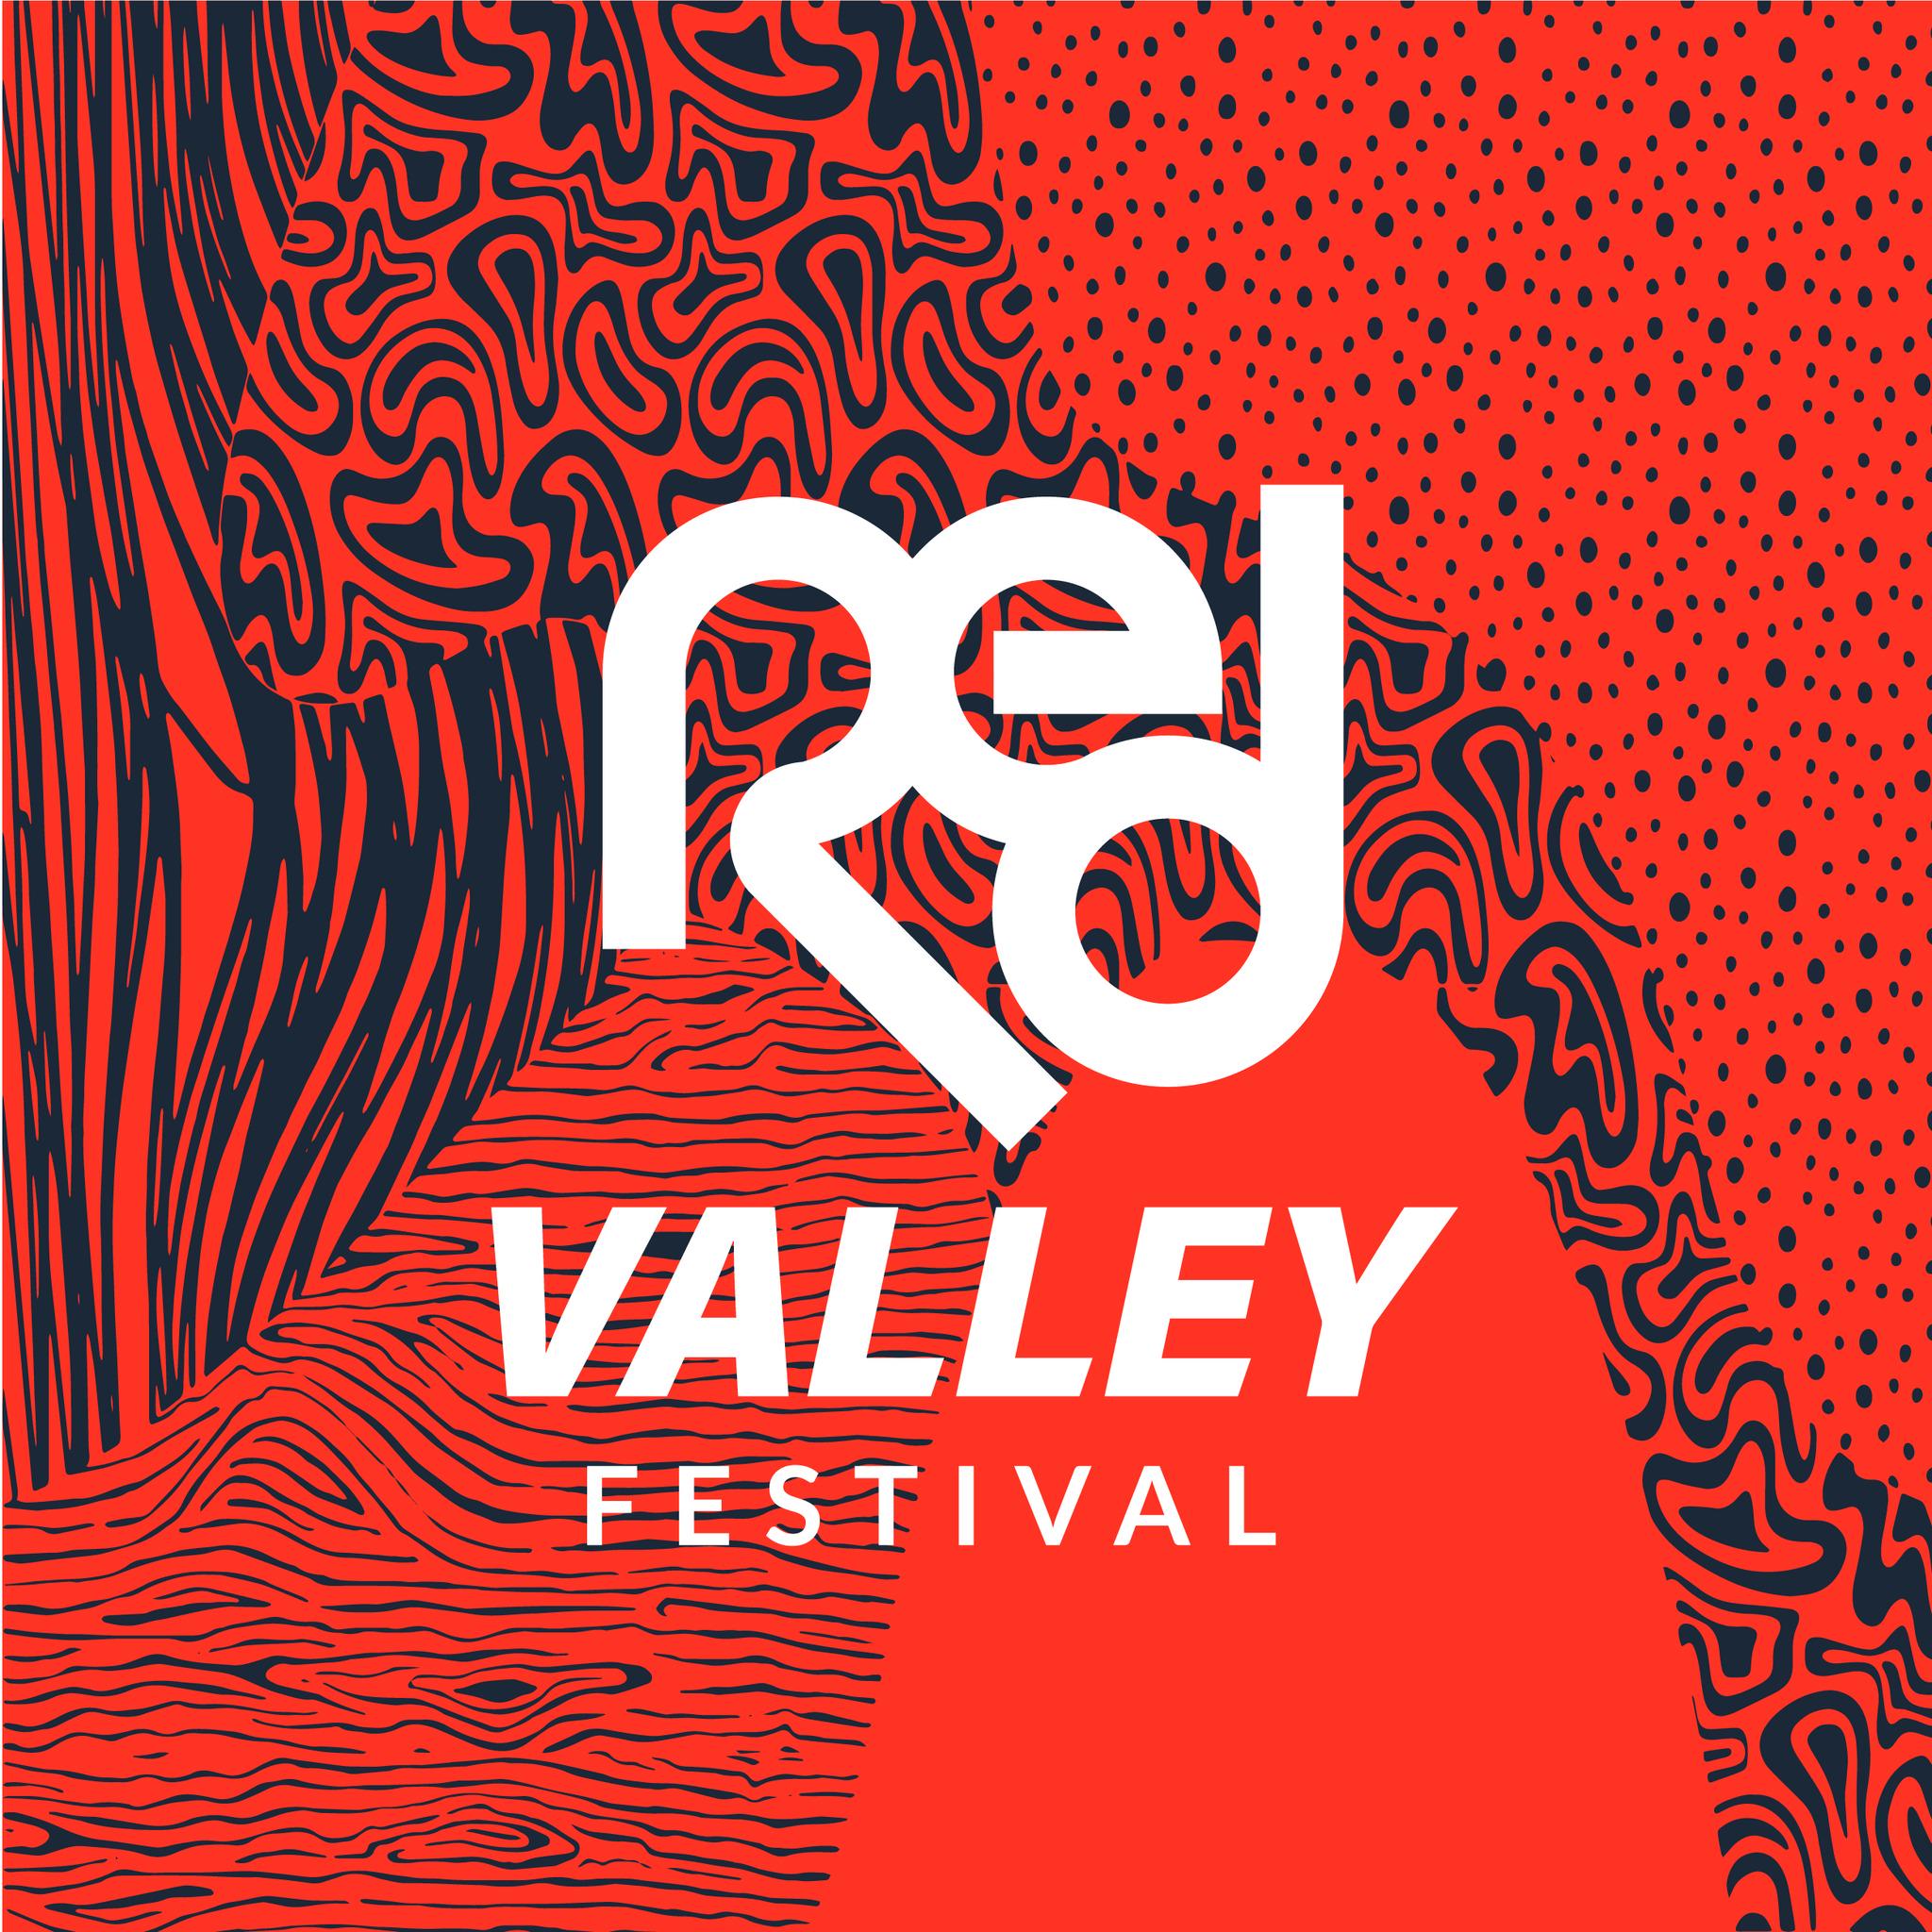 Red Valley Festival